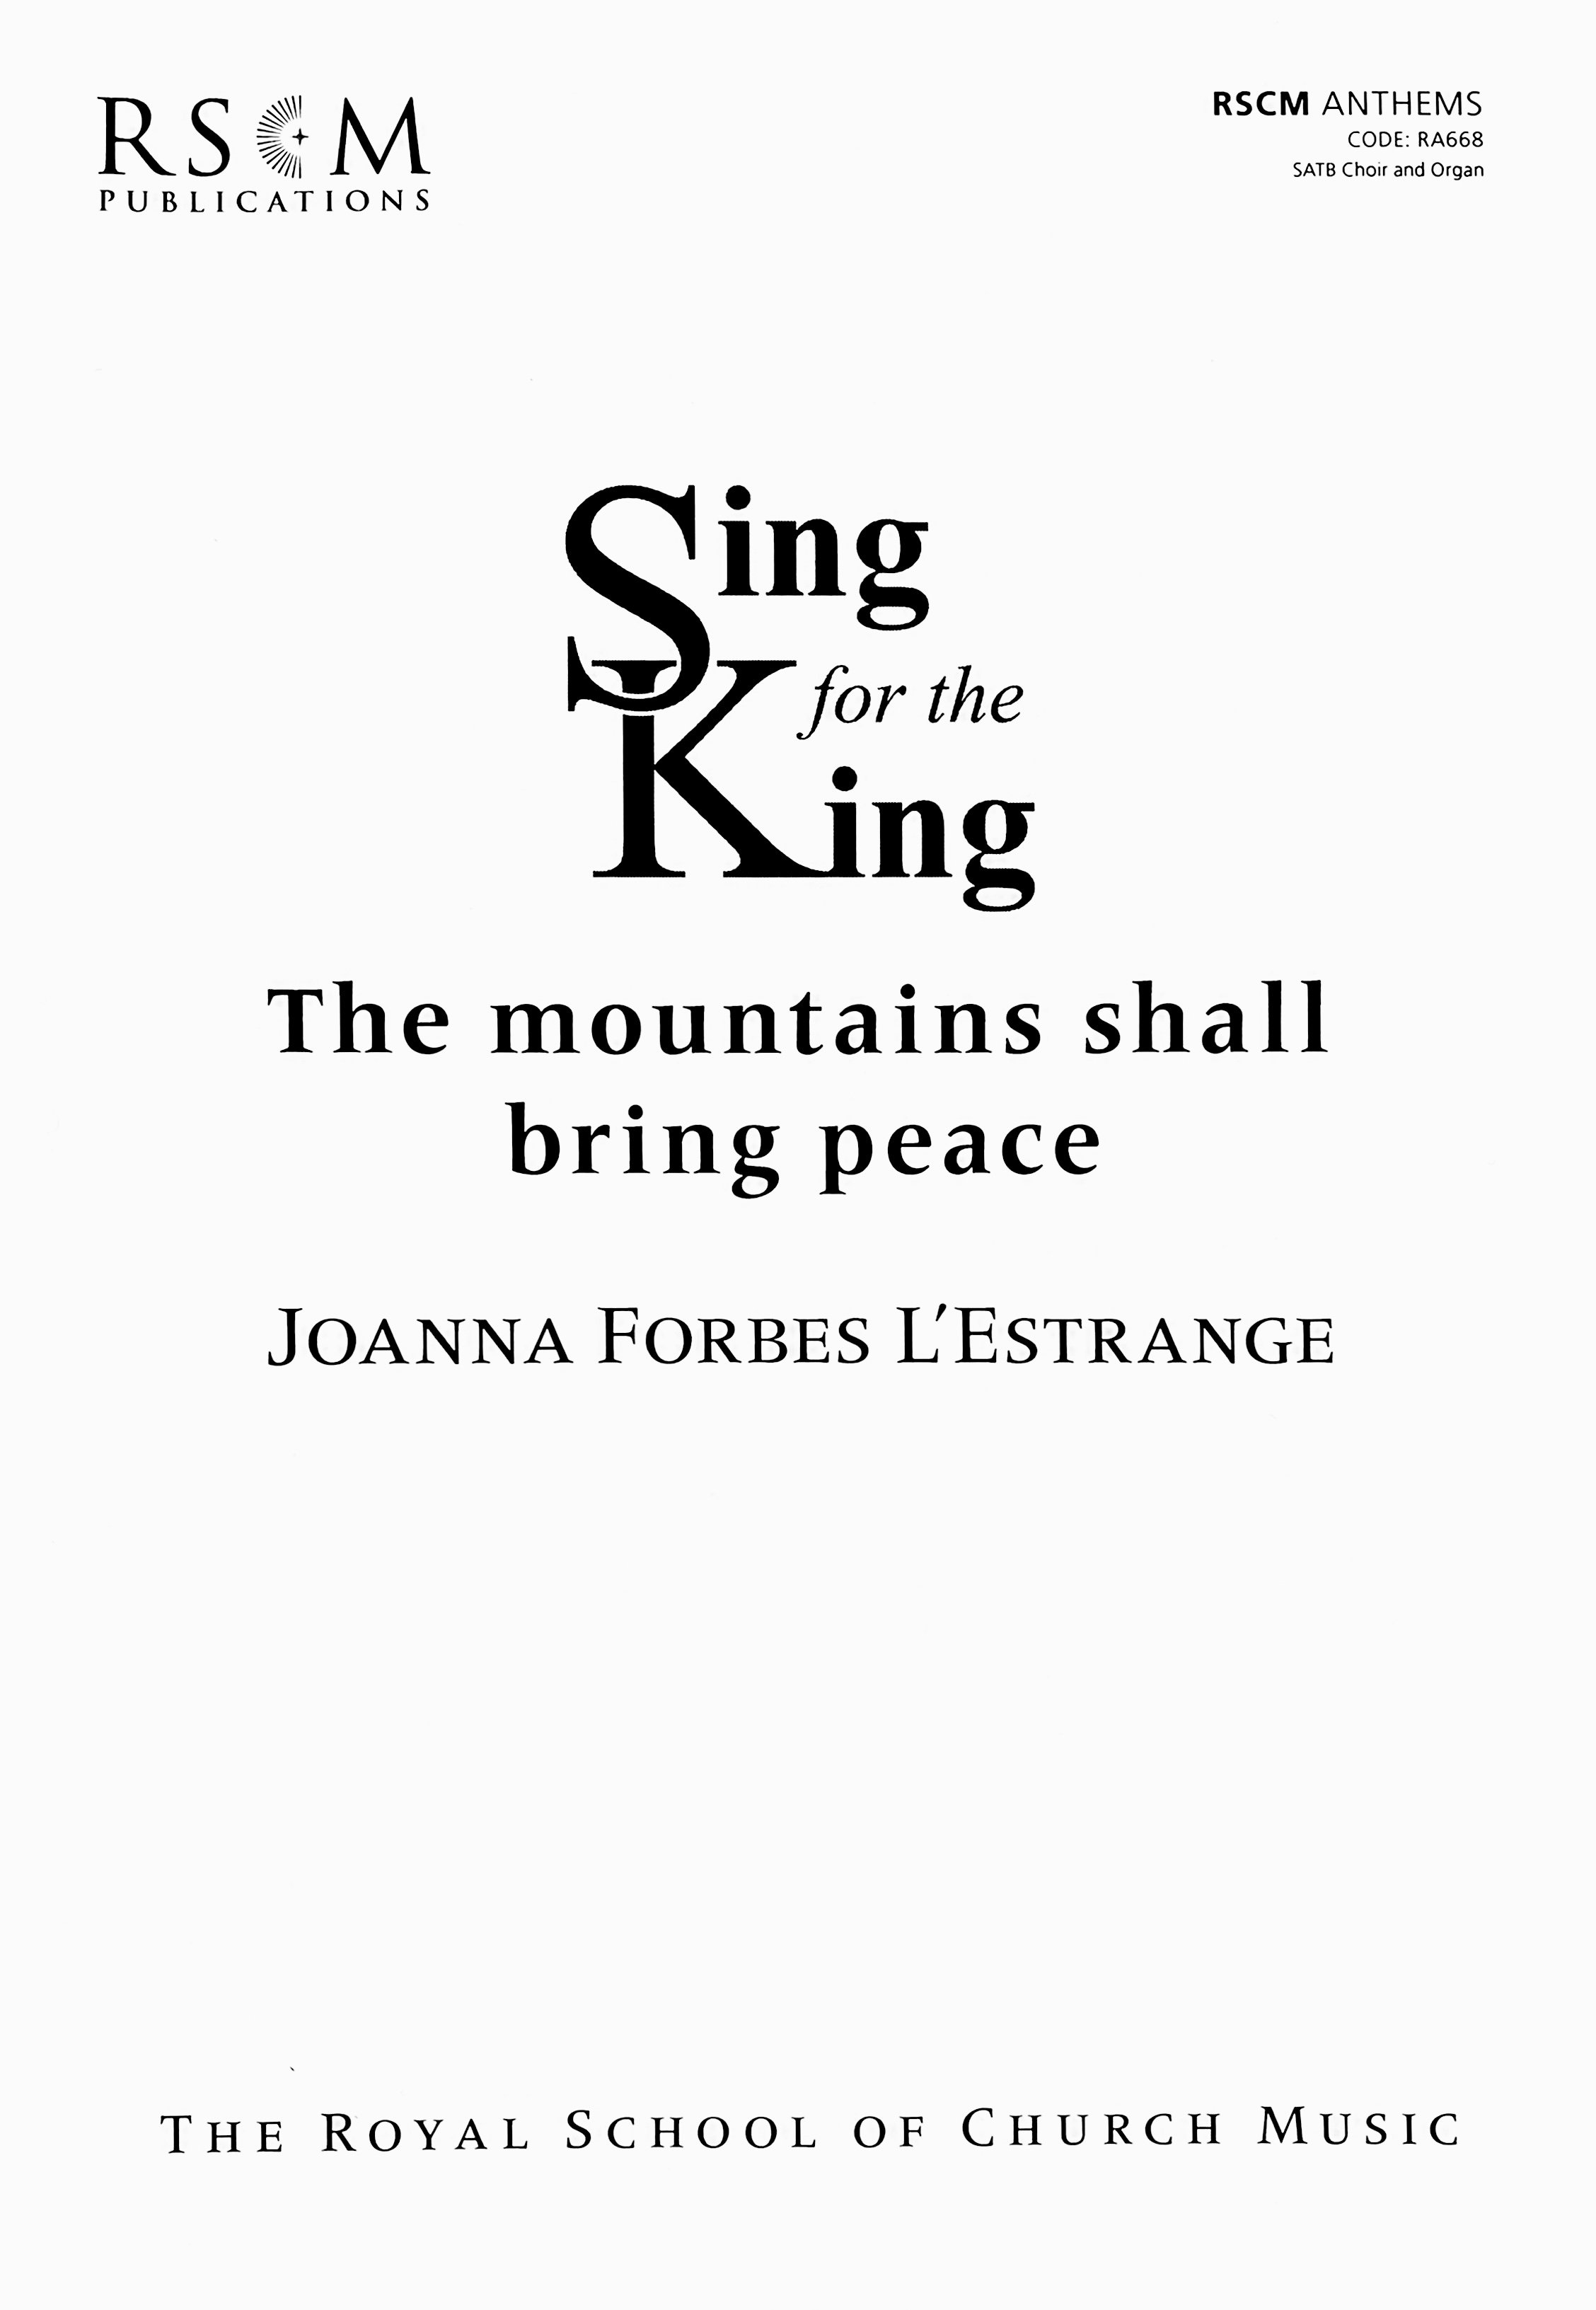 The mountains shall bring peace.jpg